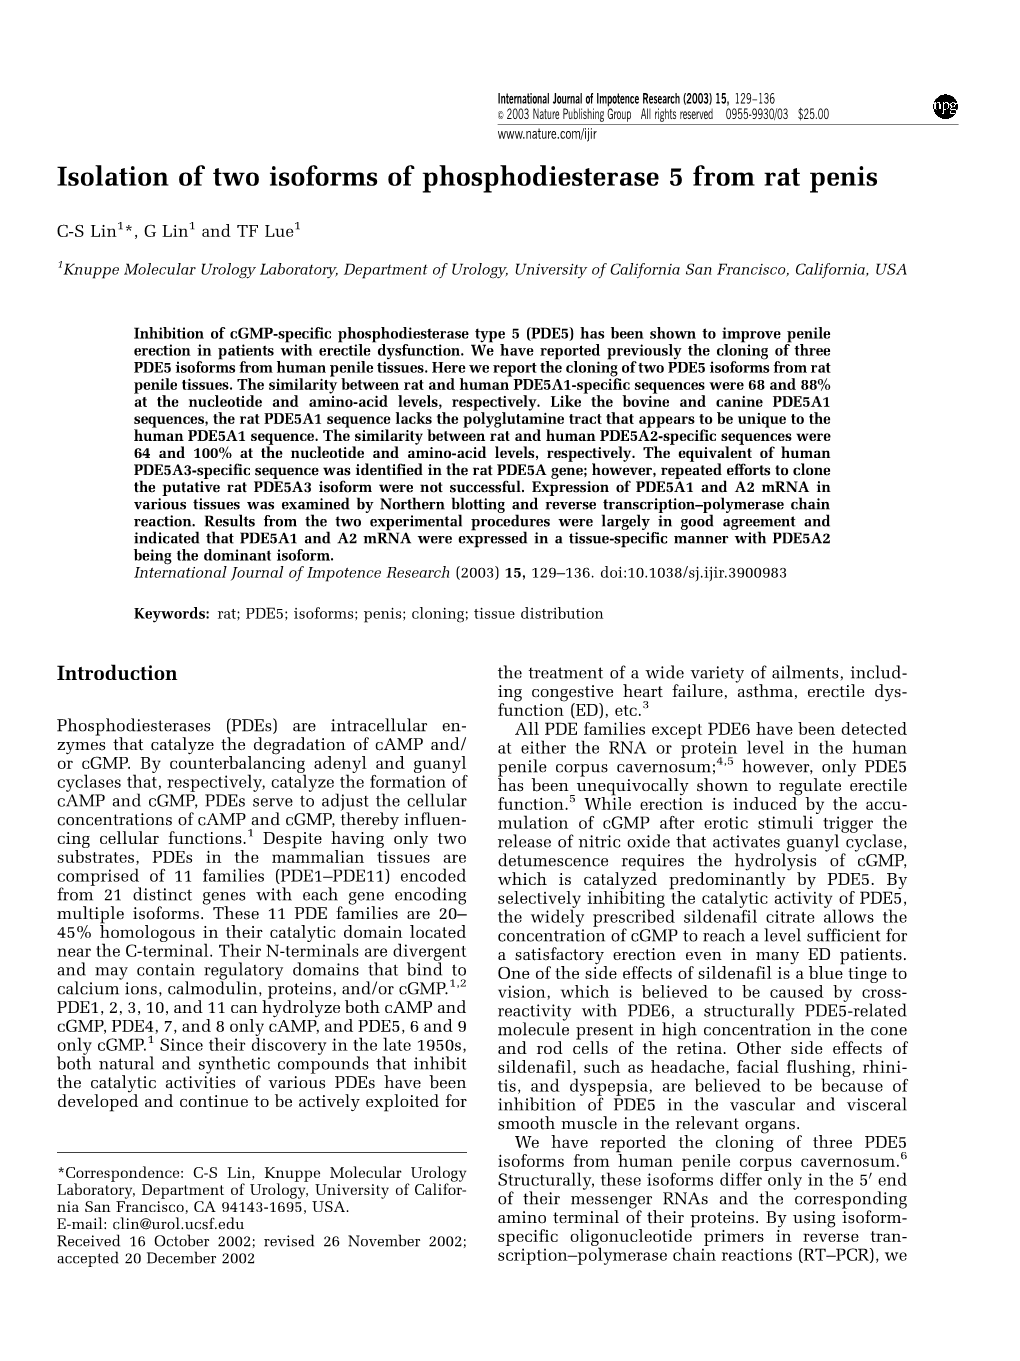 Isolation of Two Isoforms of Phosphodiesterase 5 from Rat Penis